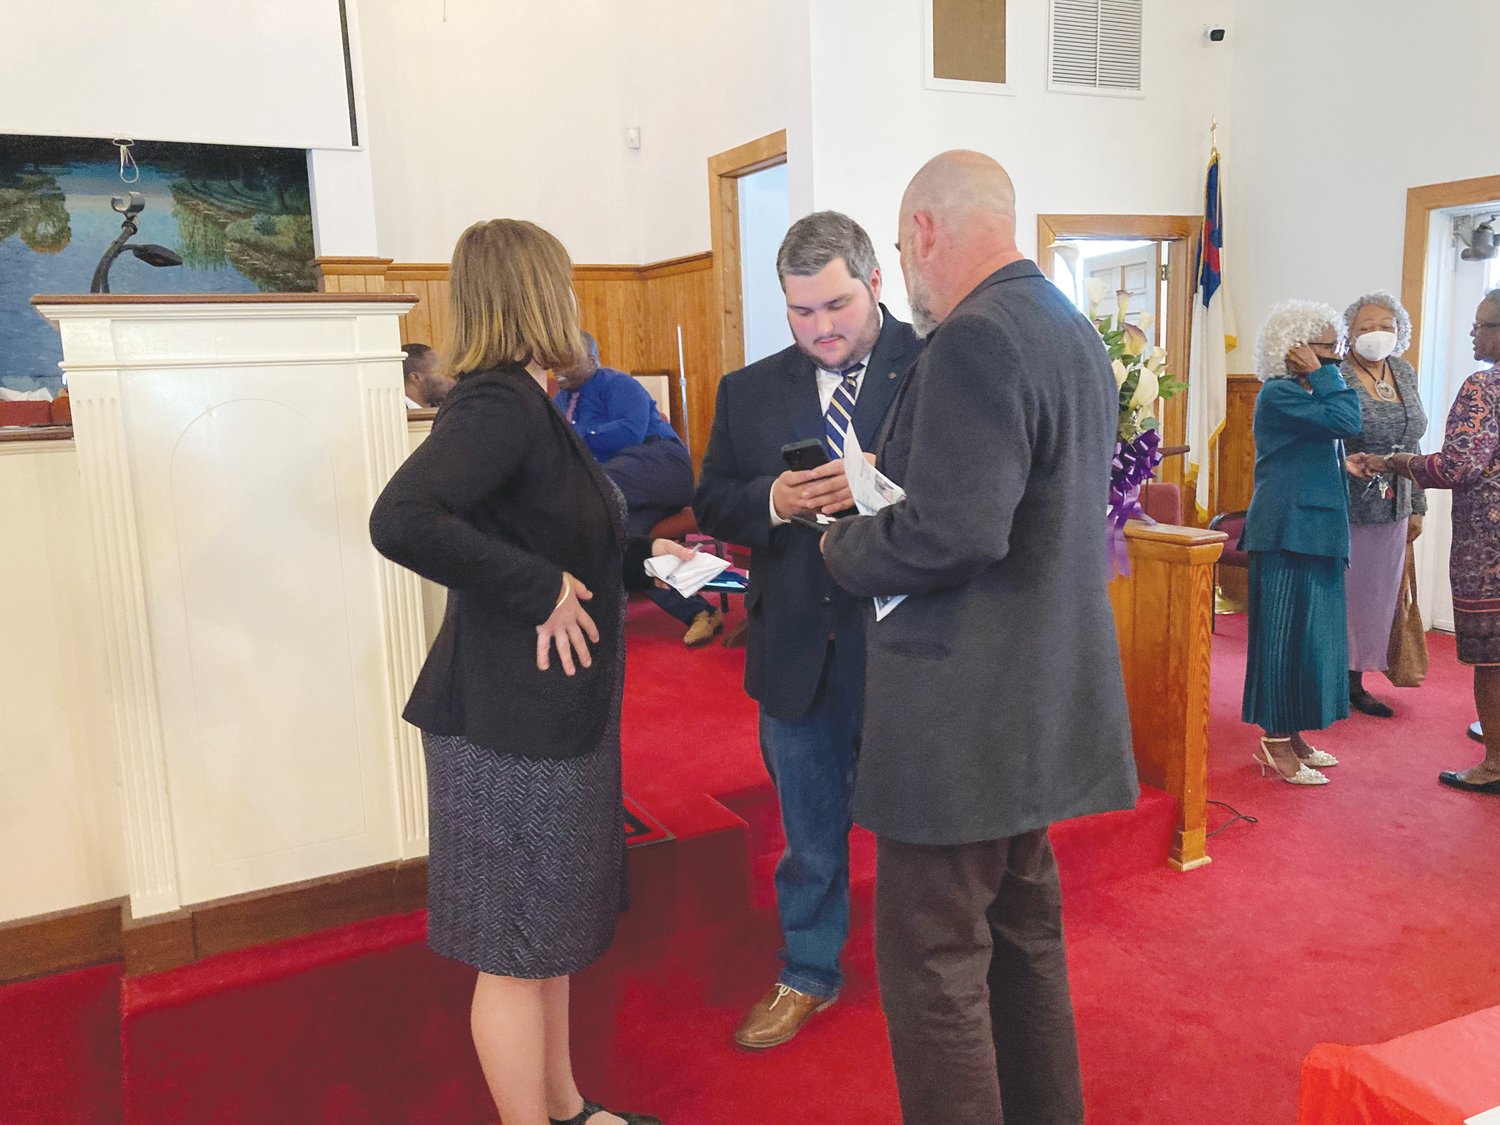 Dean Picot II (center) talking to Katie Kenlan (left) after the candidate forum on Sunday afternoon in Siler City.